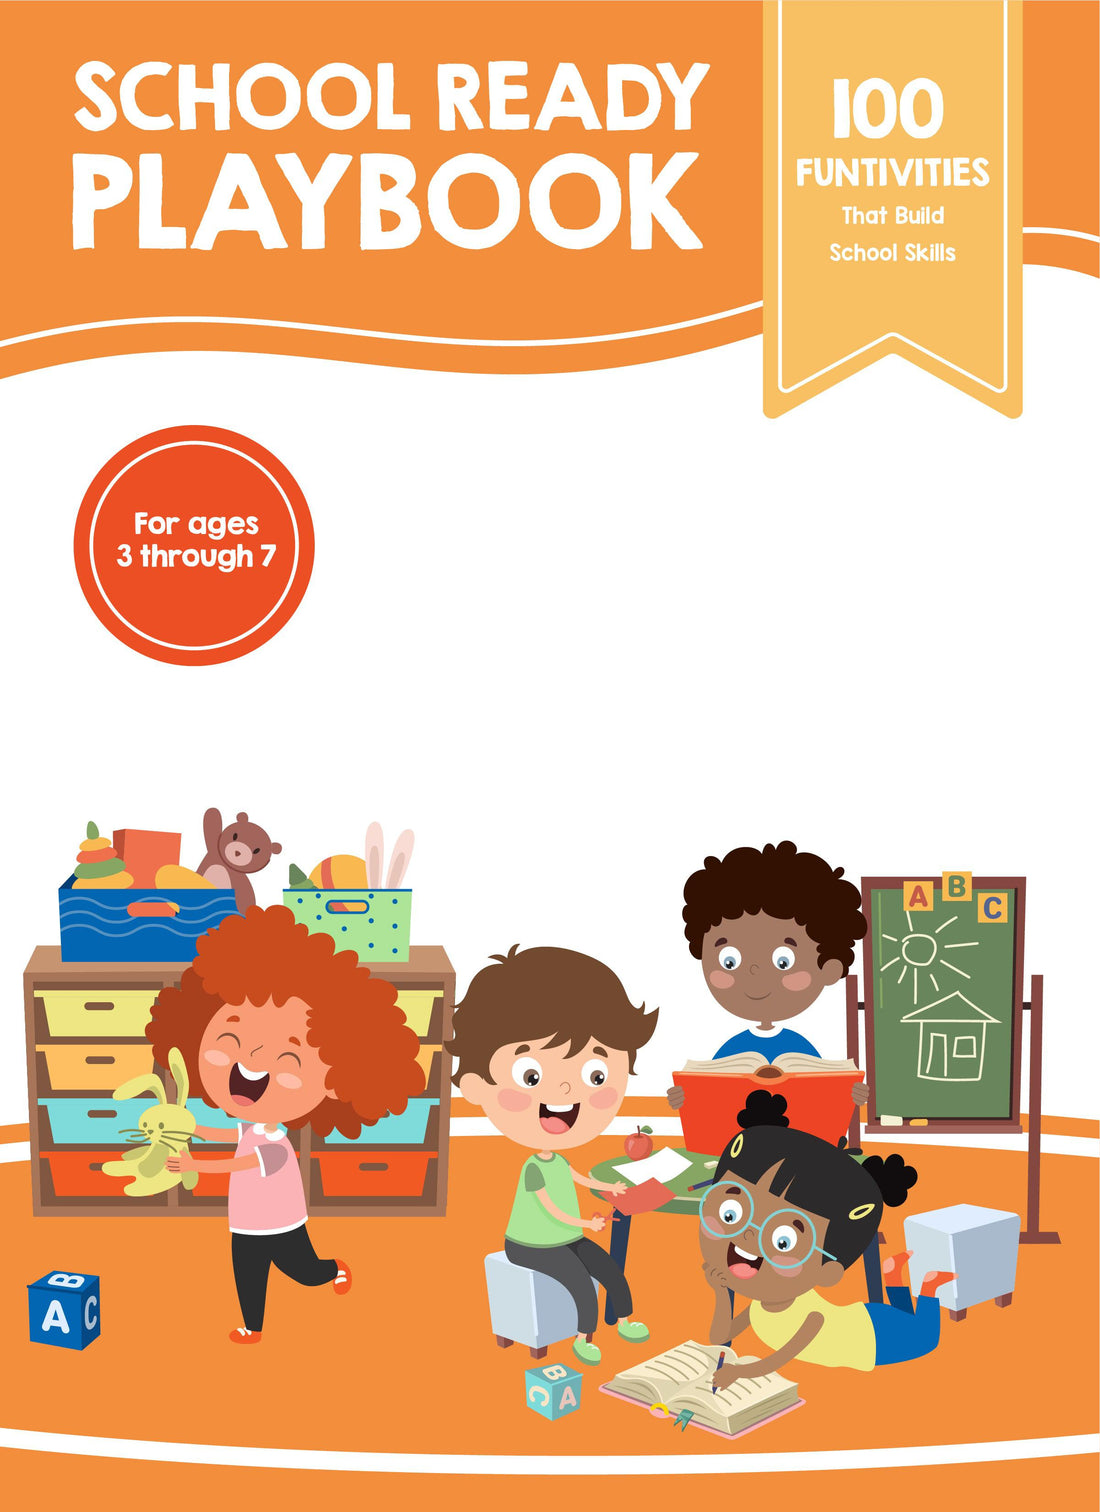 School Ready Playbook: 100 Funtivities (Ages 3-7)